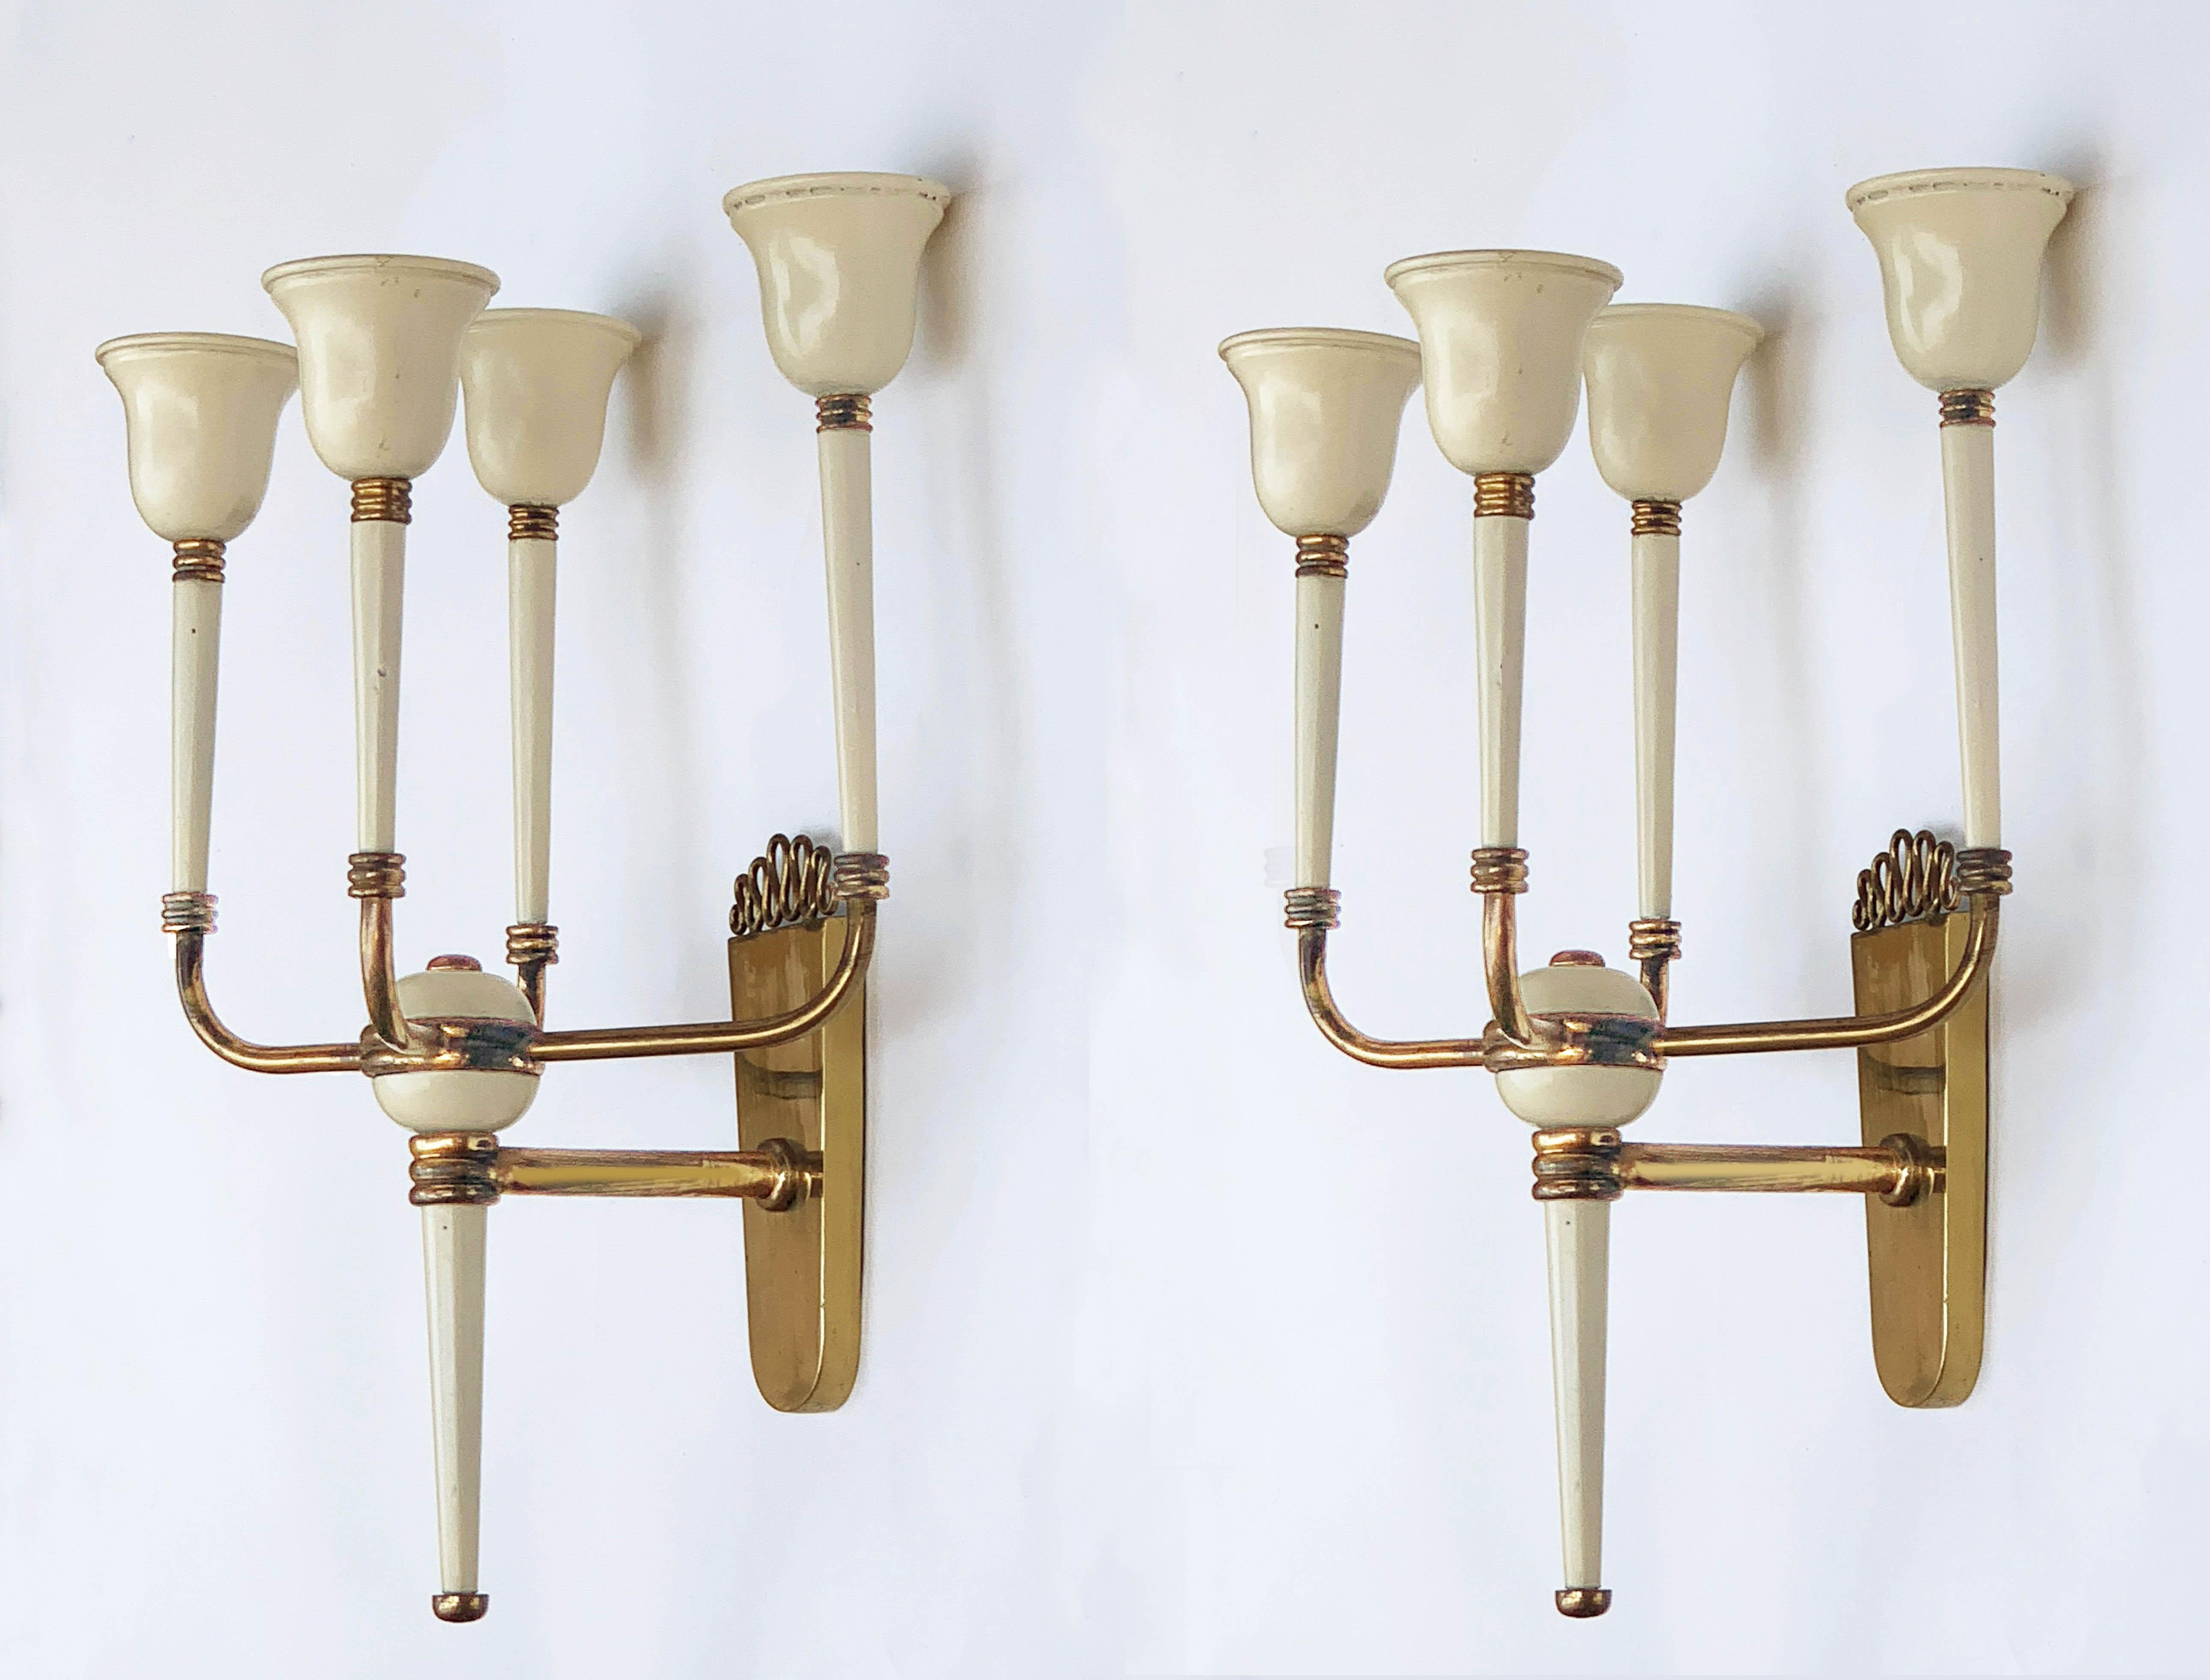 Amazing pair of brass and Ivory white enameled cones. The design of these items is attributed to Guglielmo Ulrich and they were produced in Italy during 1940s.

These pieces have four arms mounting E 14 bulbs and are a clear Art Deco example of